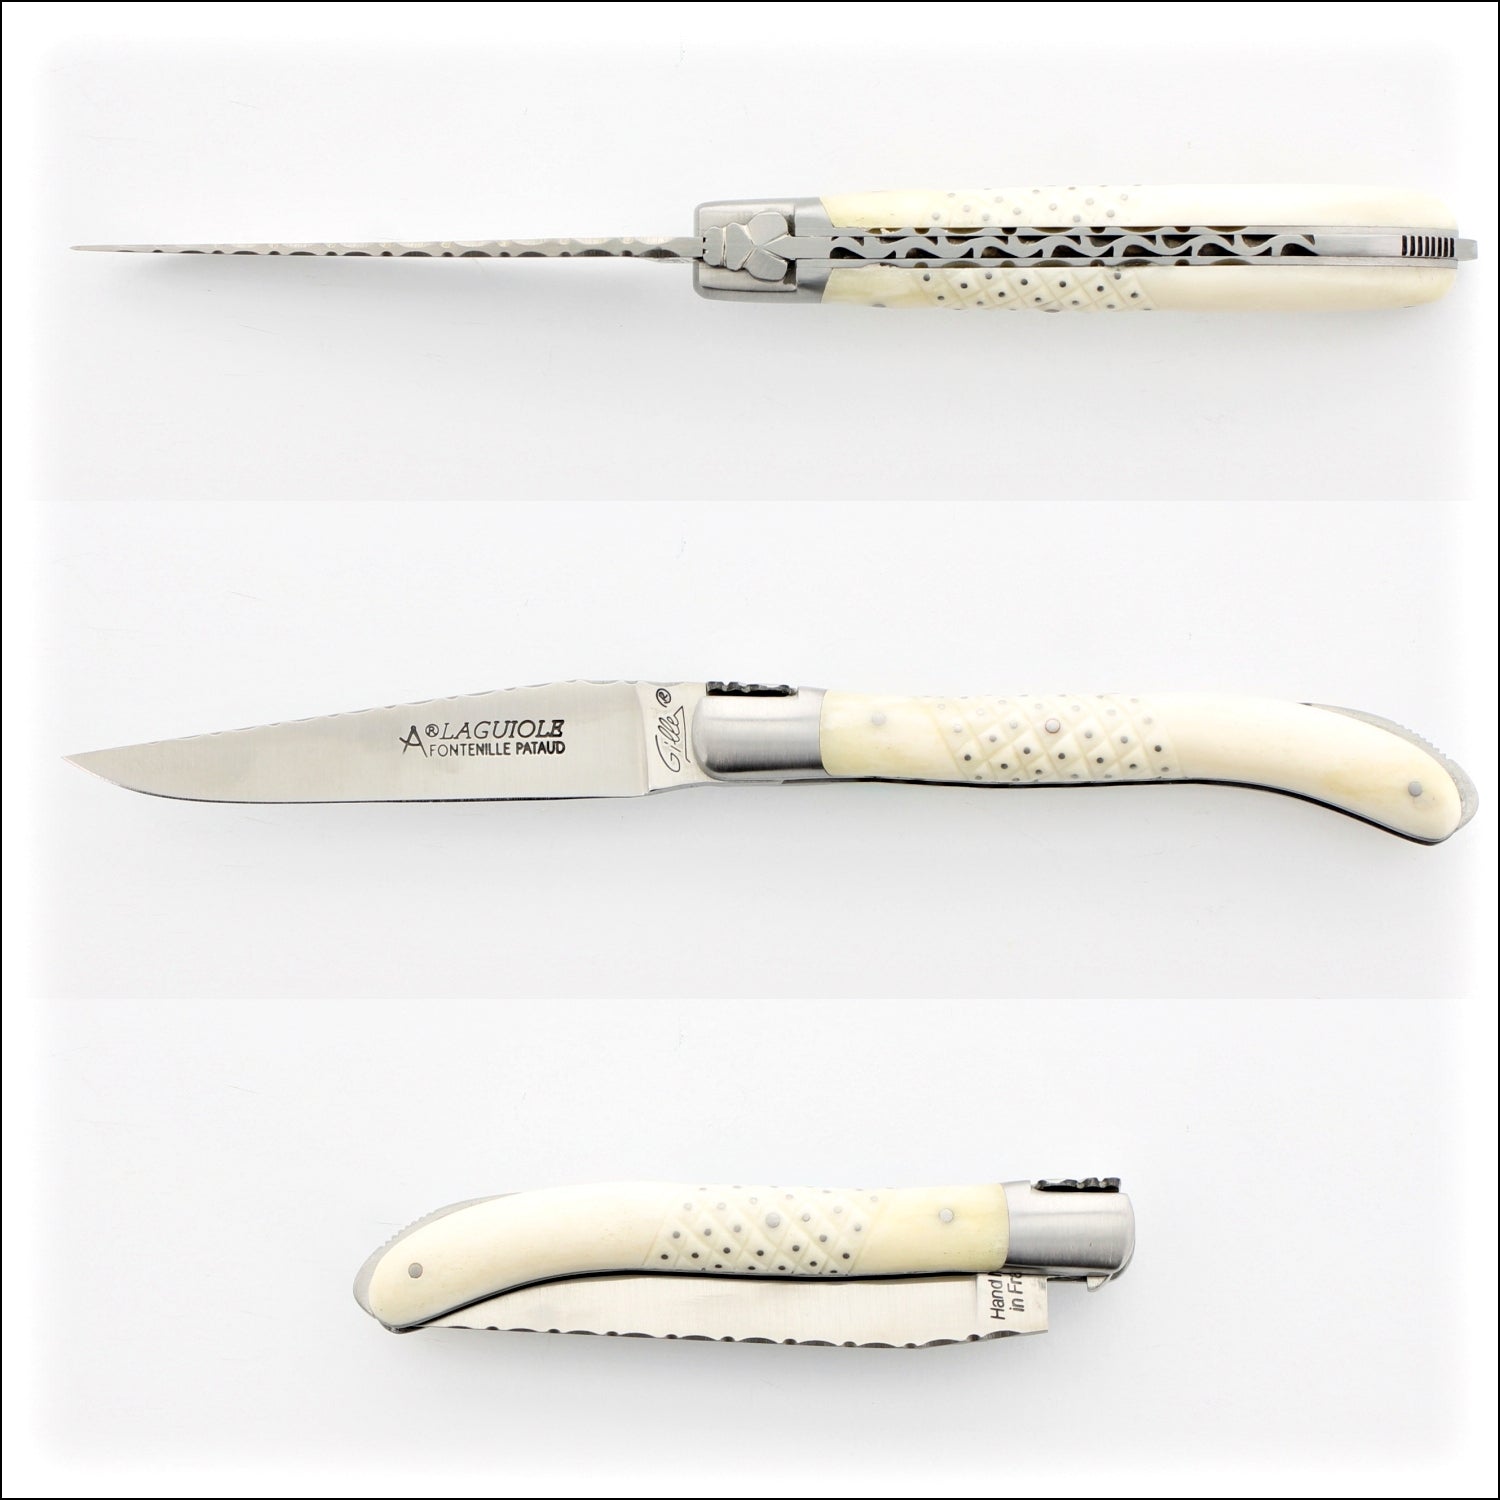 Multi-Color Cheese Knife Set - Feather pattern handles - Small